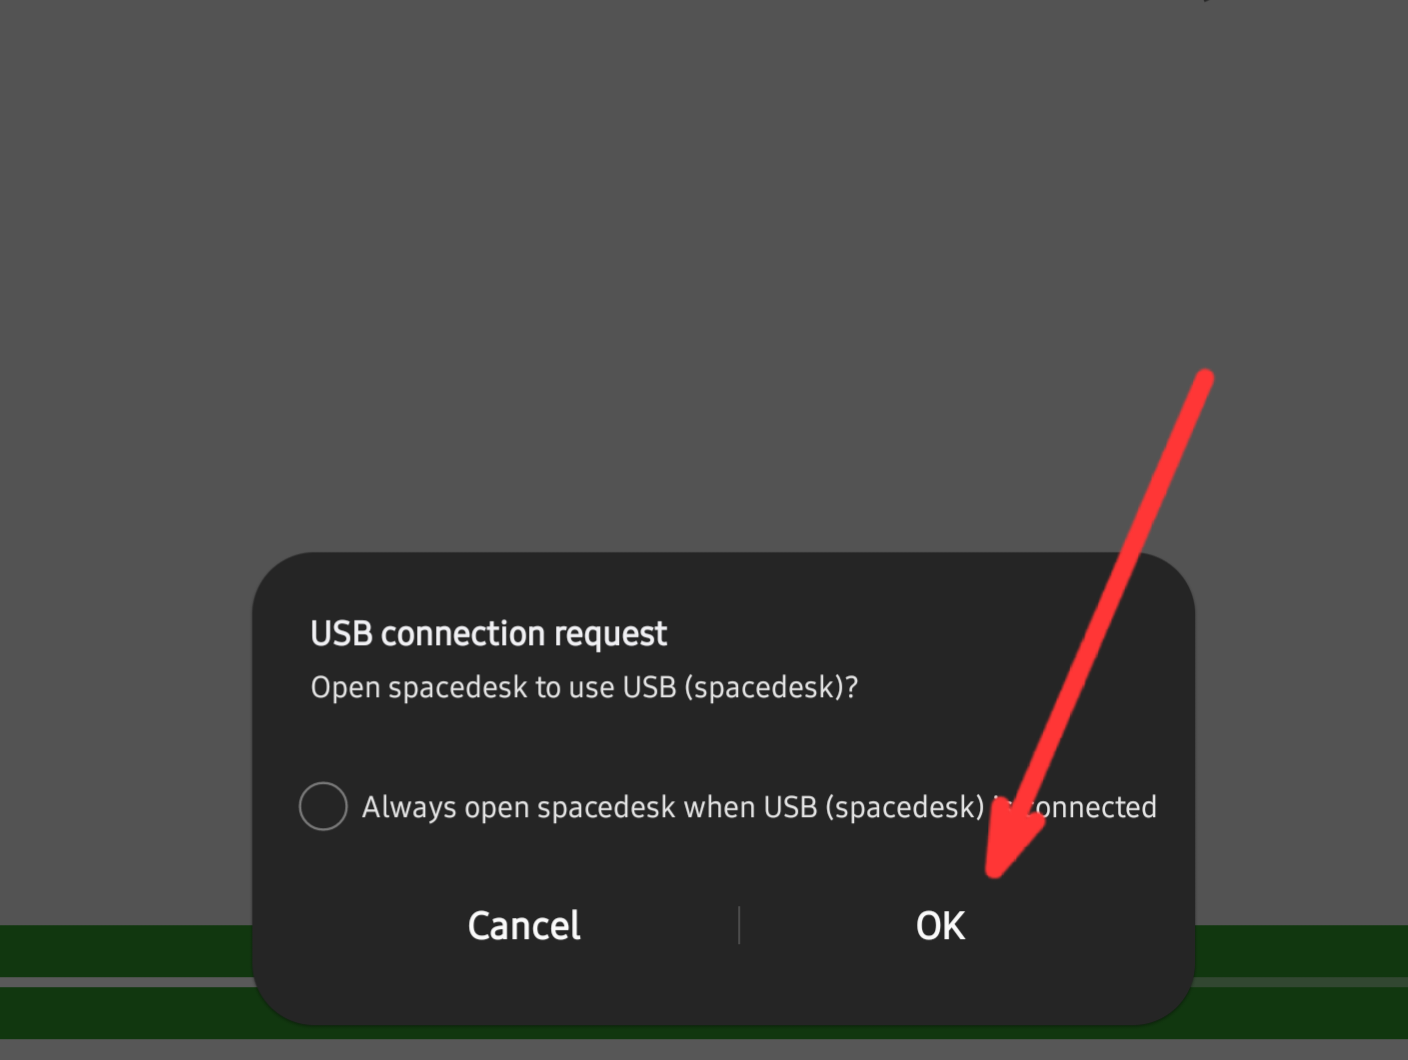 Allowing the USB connection request from Spacedesk.